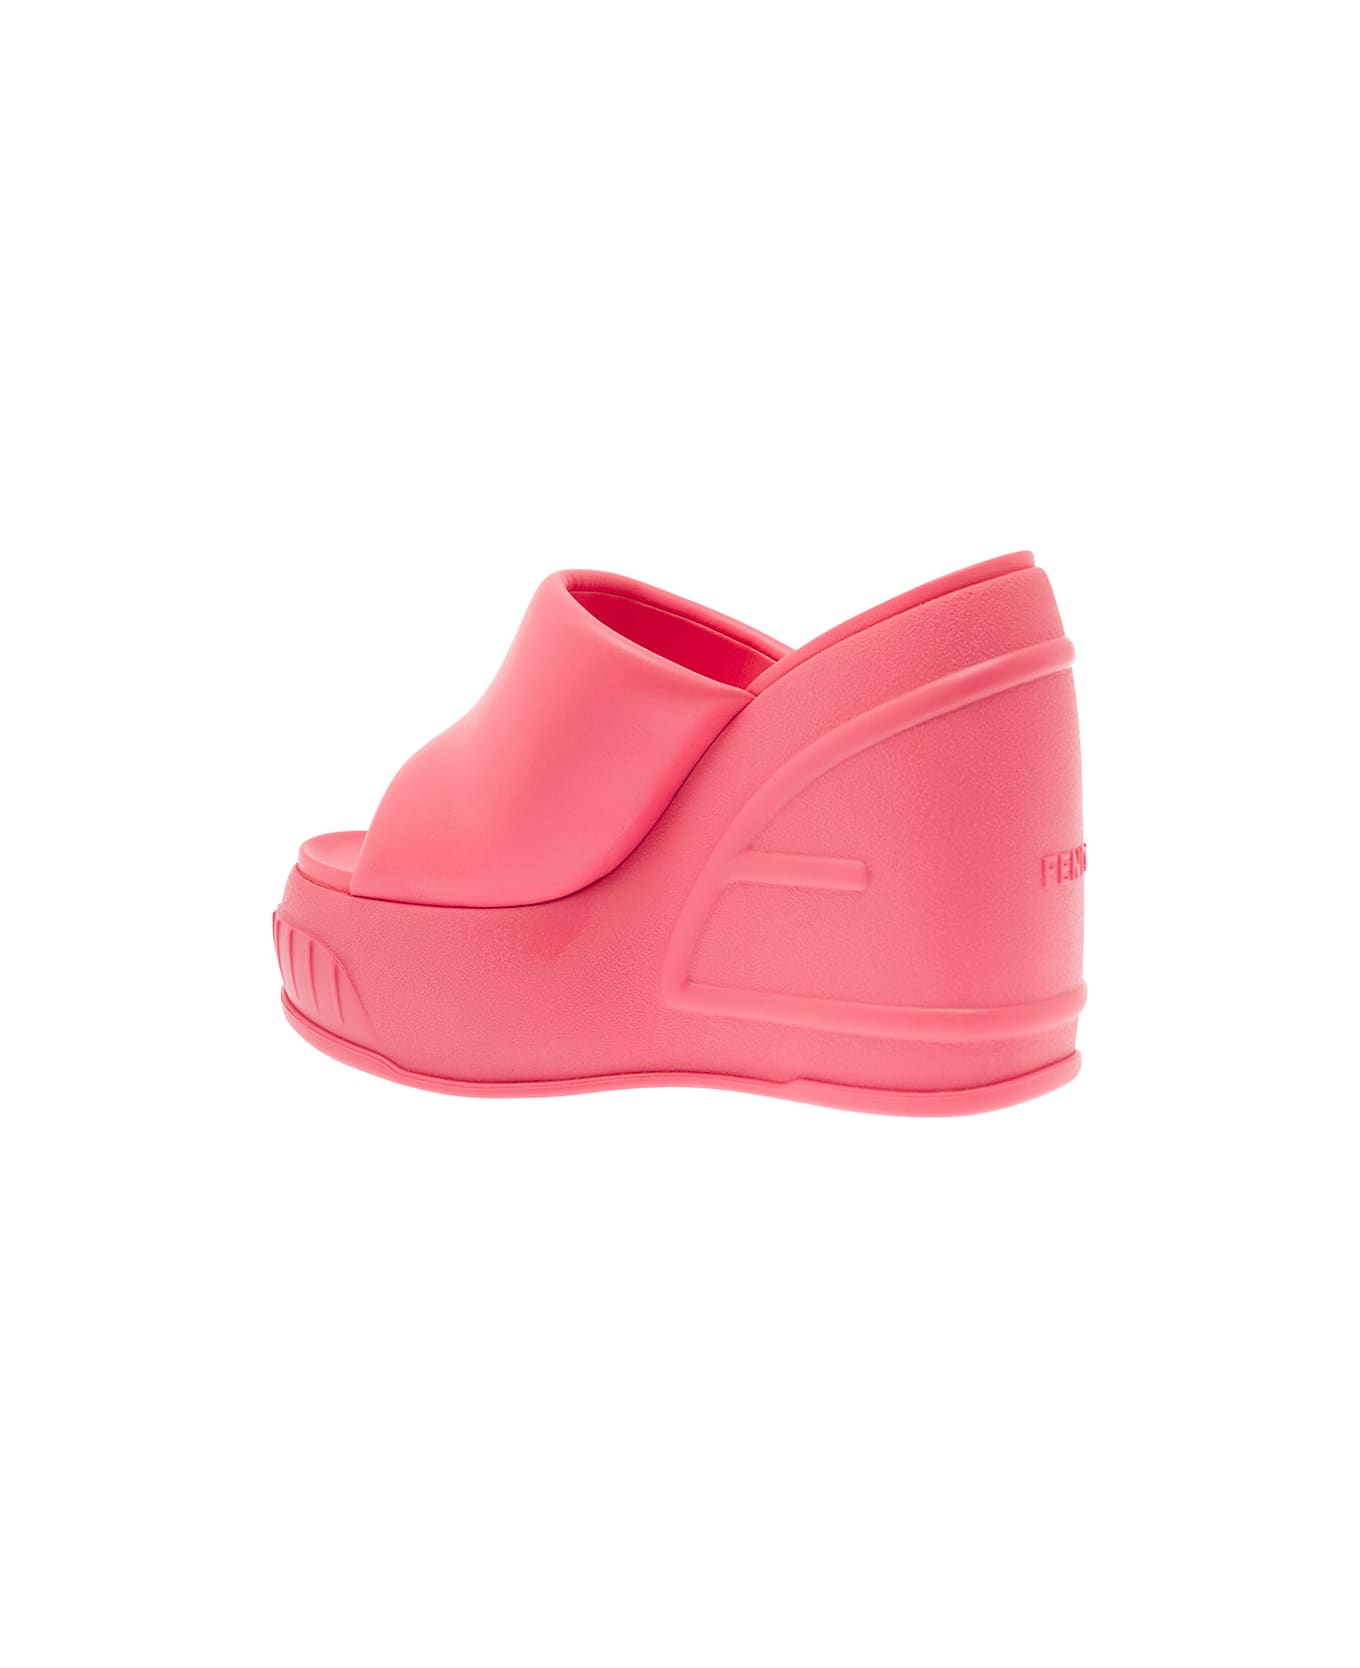 Fendi Pink Platform Slides With Embossed Oversized Ff Pattern In Leather Woman - Pink